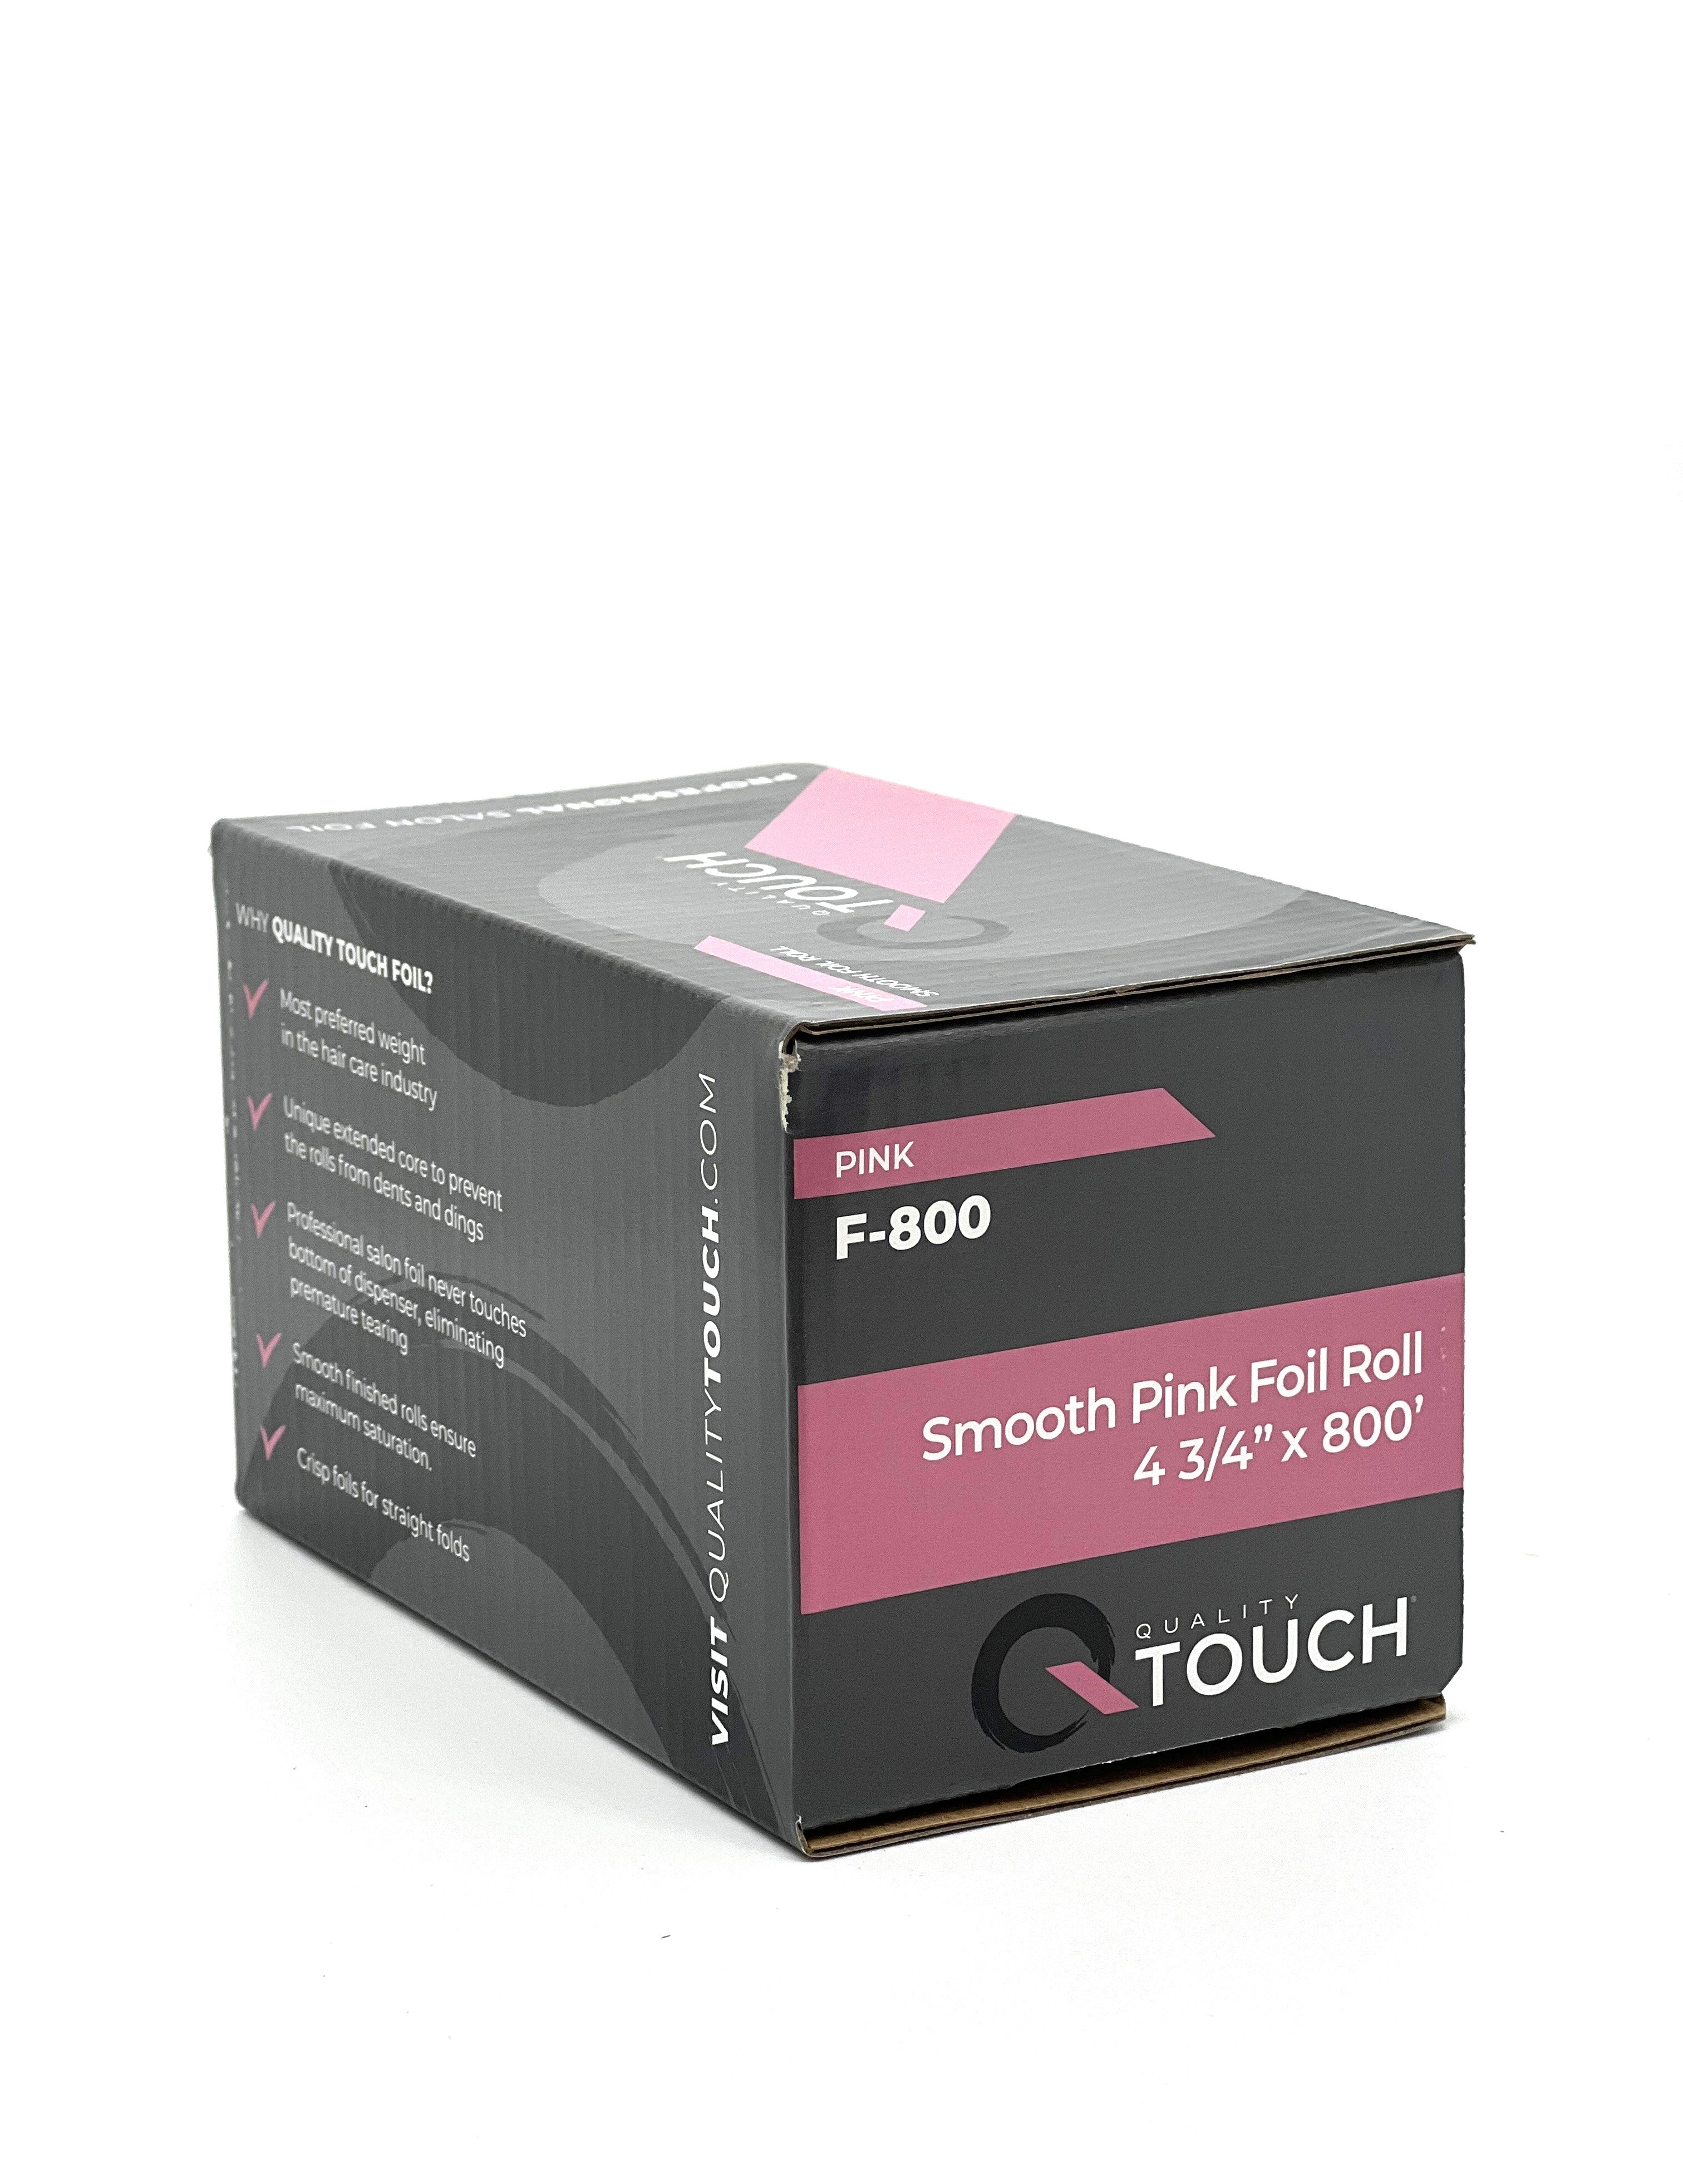 Professional Highlighting Foil for Hairstylists - Pink | #1 Rolled Foil from Quality Touch